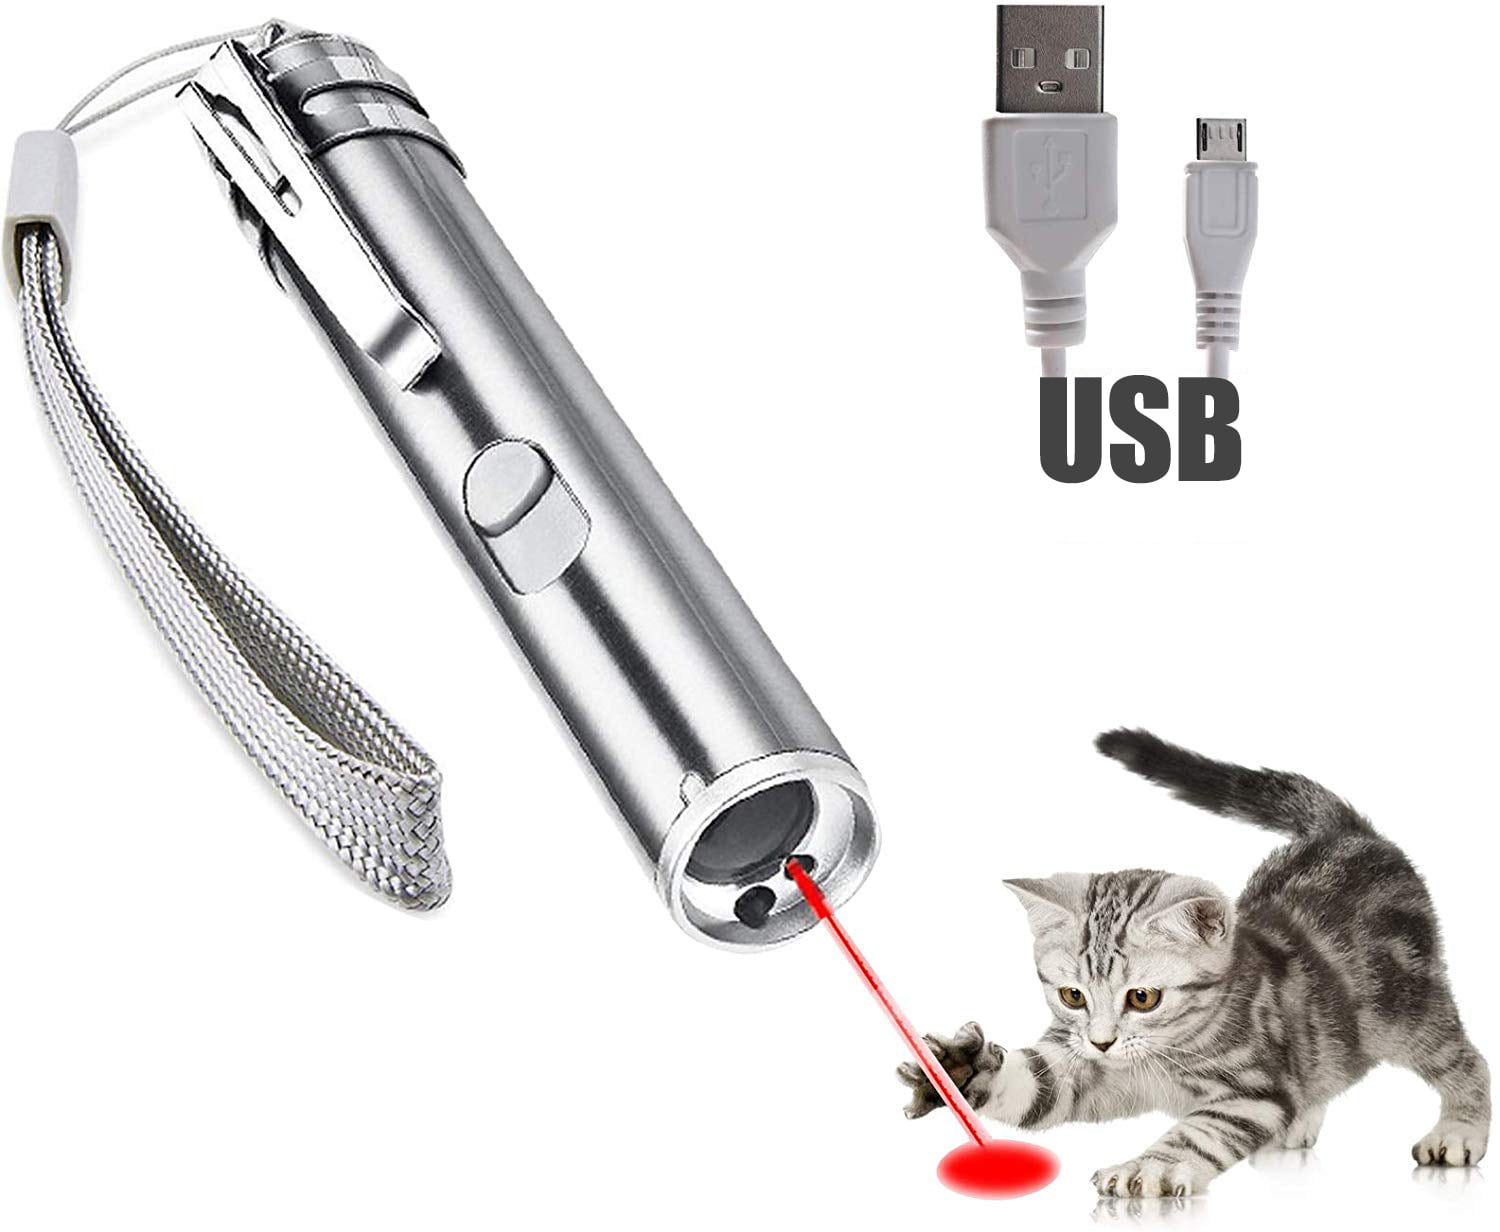 2 in 1 LASER LAZER POINTER PEN LED TORCH PET CAT DOG TOY BRAND NEW 